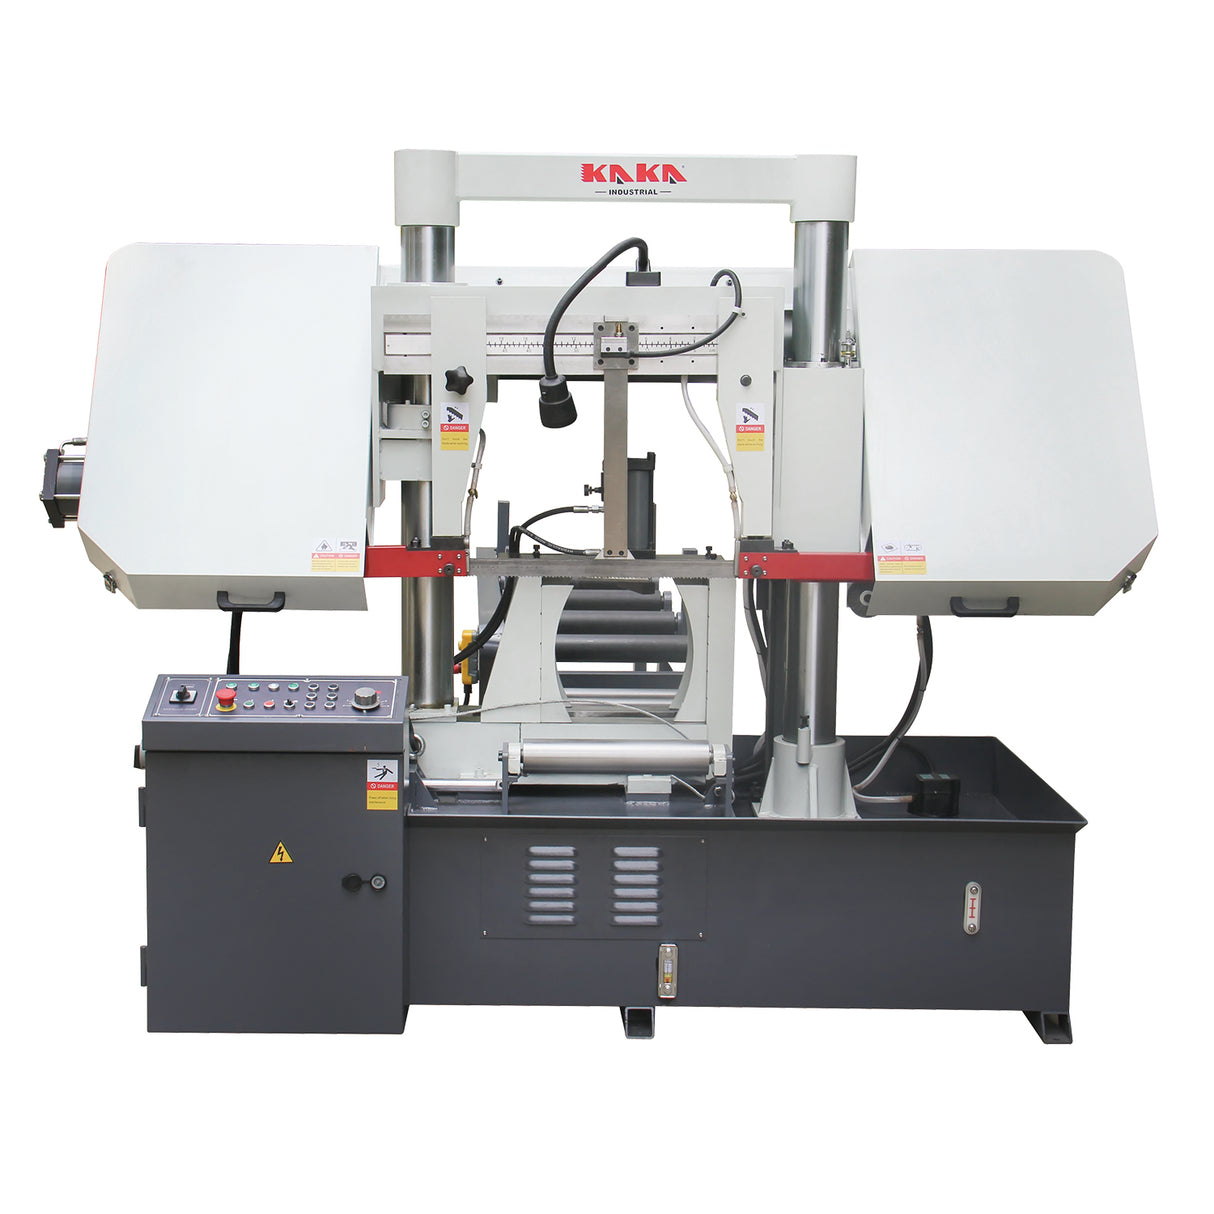 Kang Industrial TGK-16A Double Column Band Saw is an industrial grade metal cutting band saw that operates on 415V power.